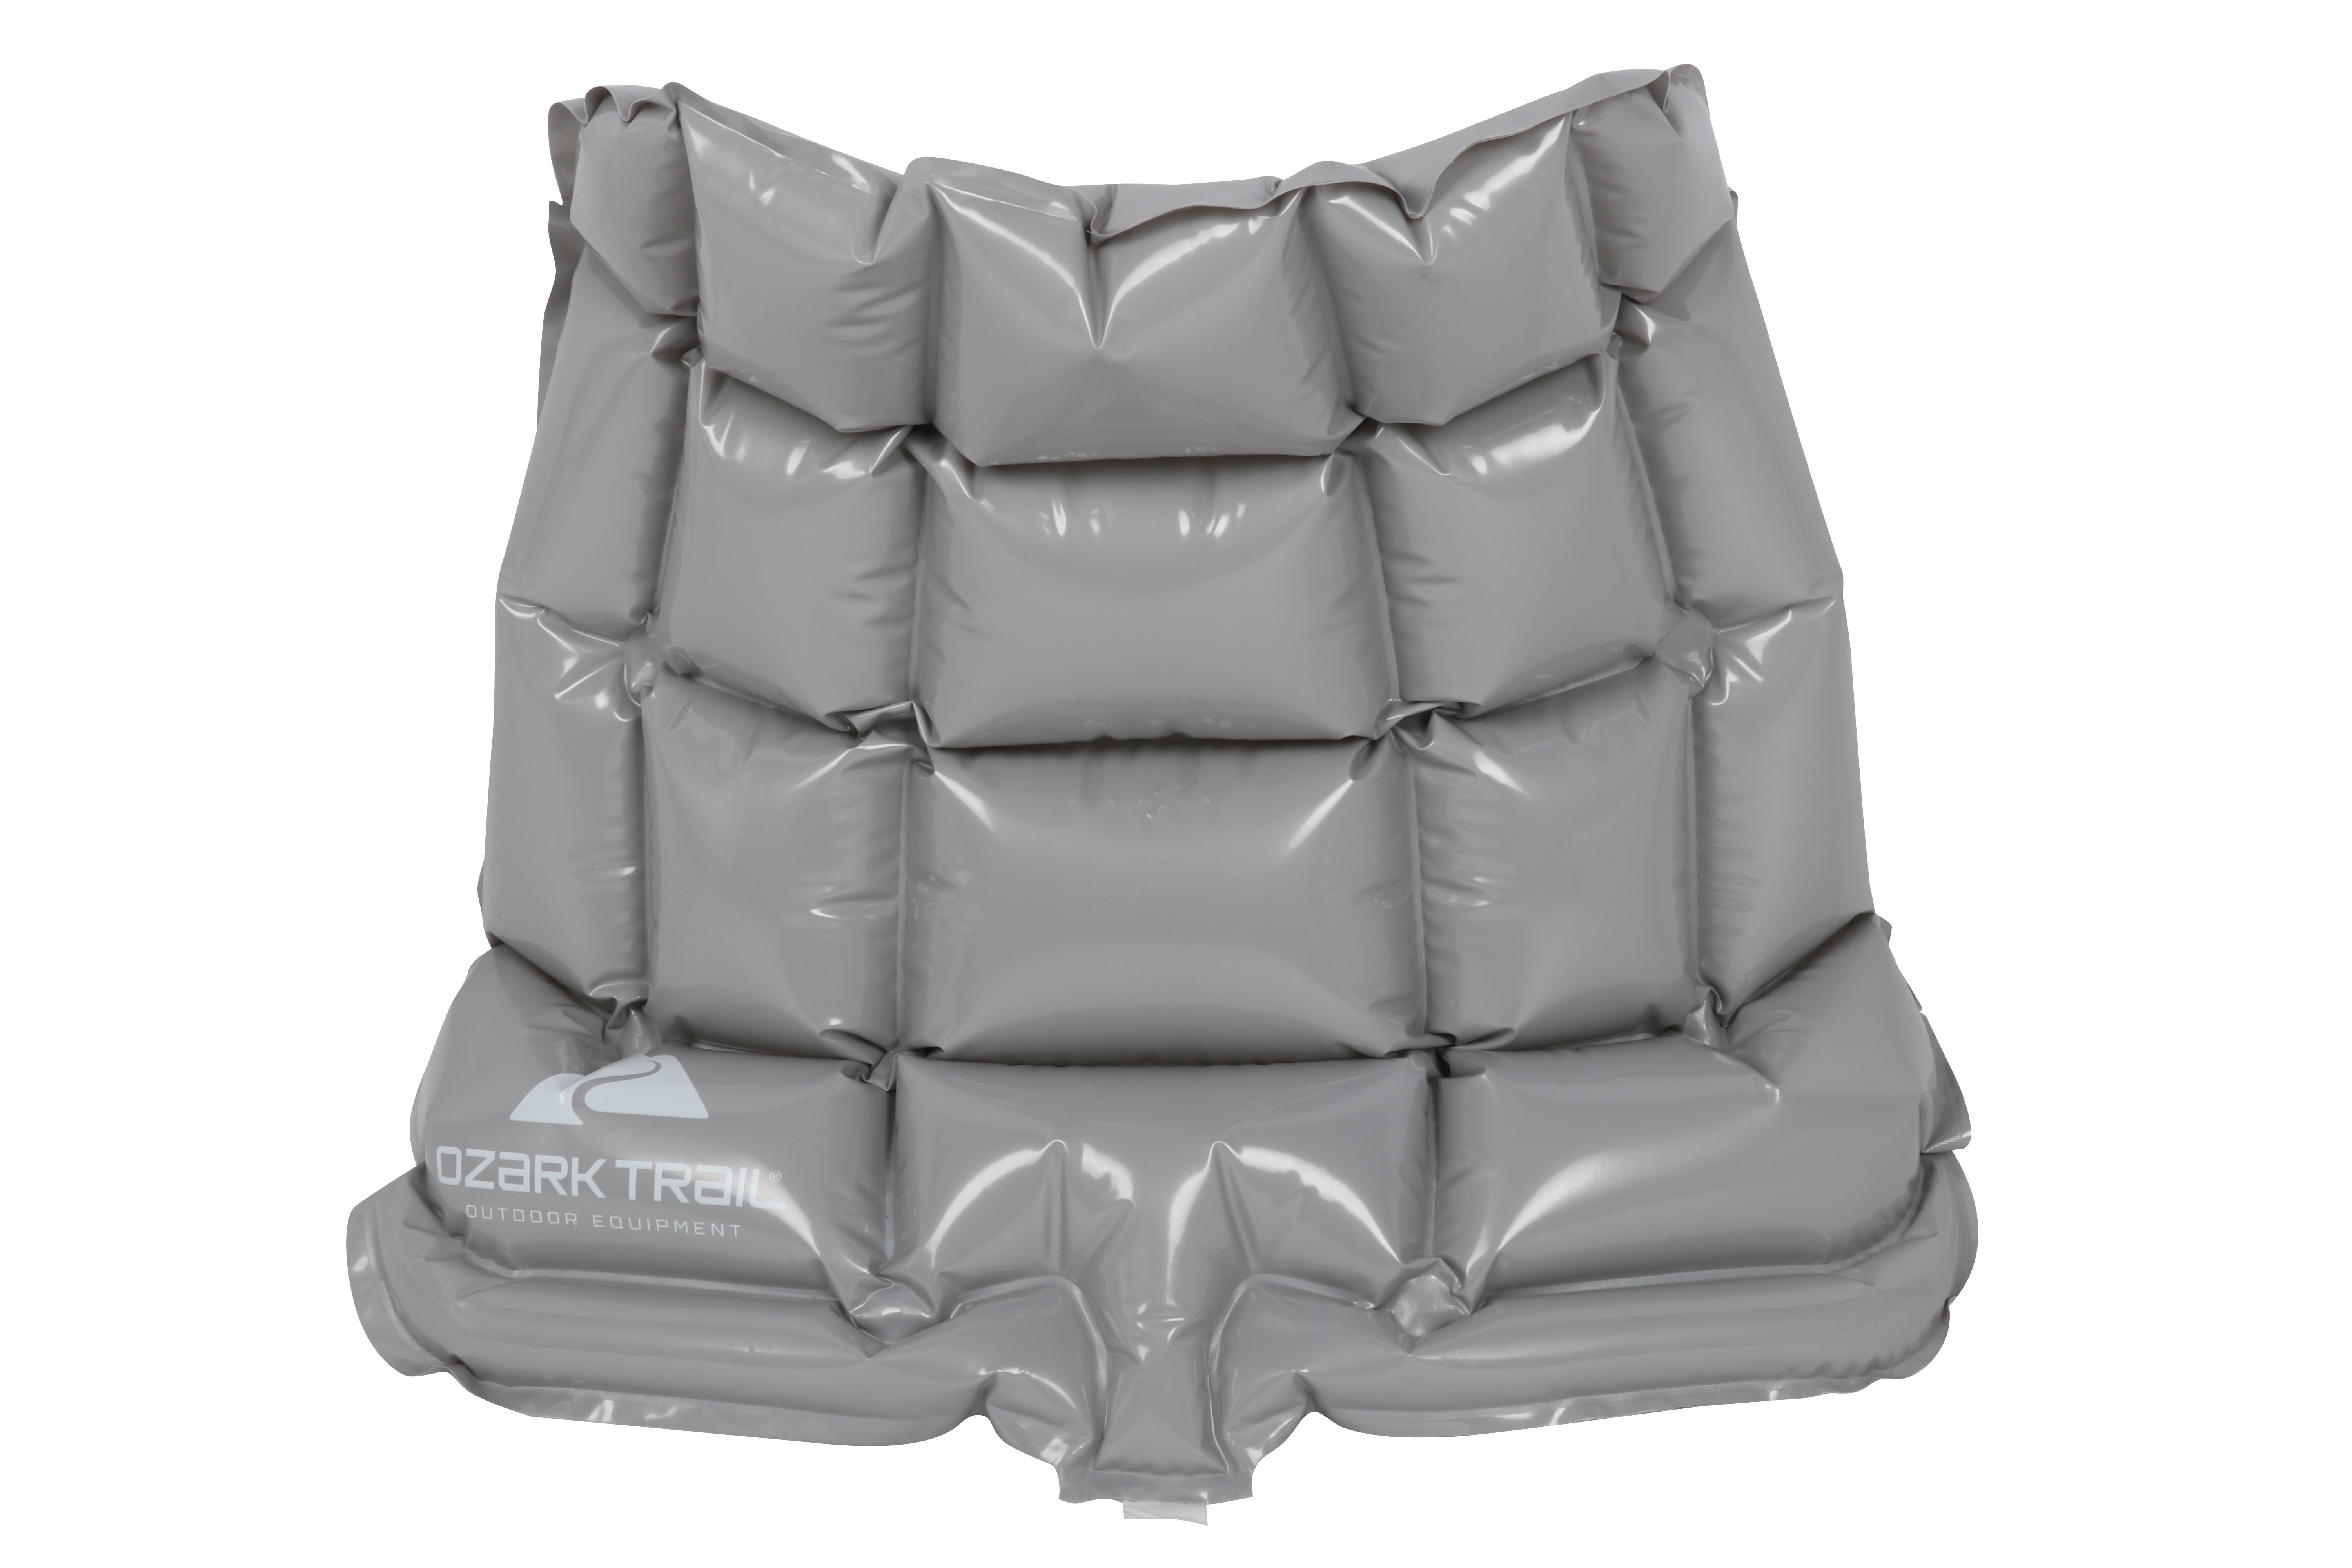 Ozark Trail Inflatable, Stadium Camping Outdoor Seating Cushion, Gray,